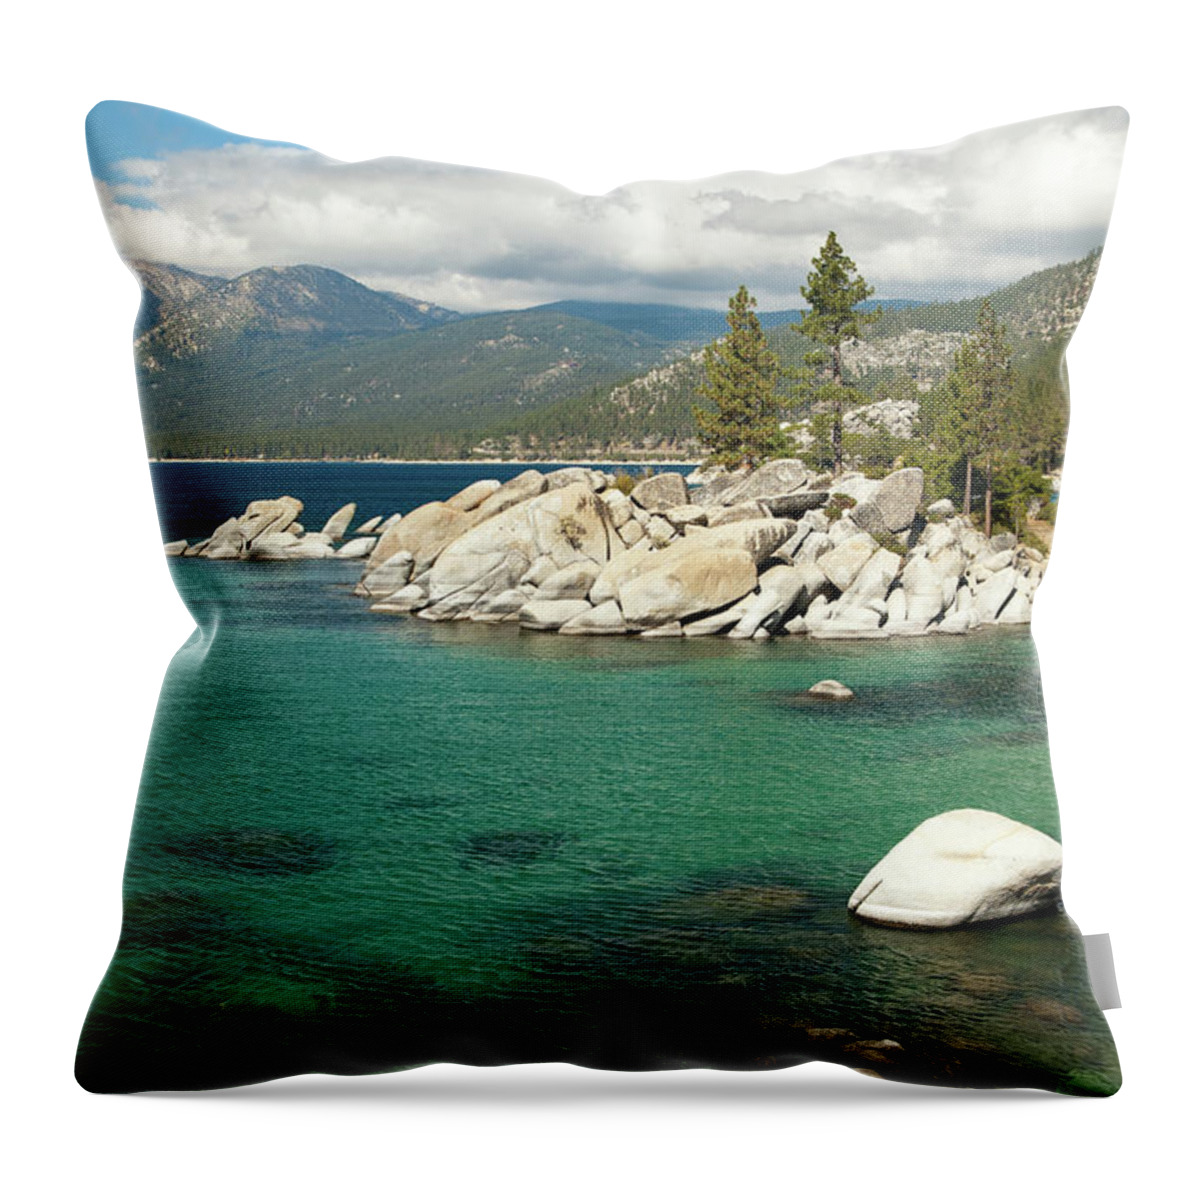 Scenics Throw Pillow featuring the photograph Lake Tahoe Landscape by Megan Ahrens